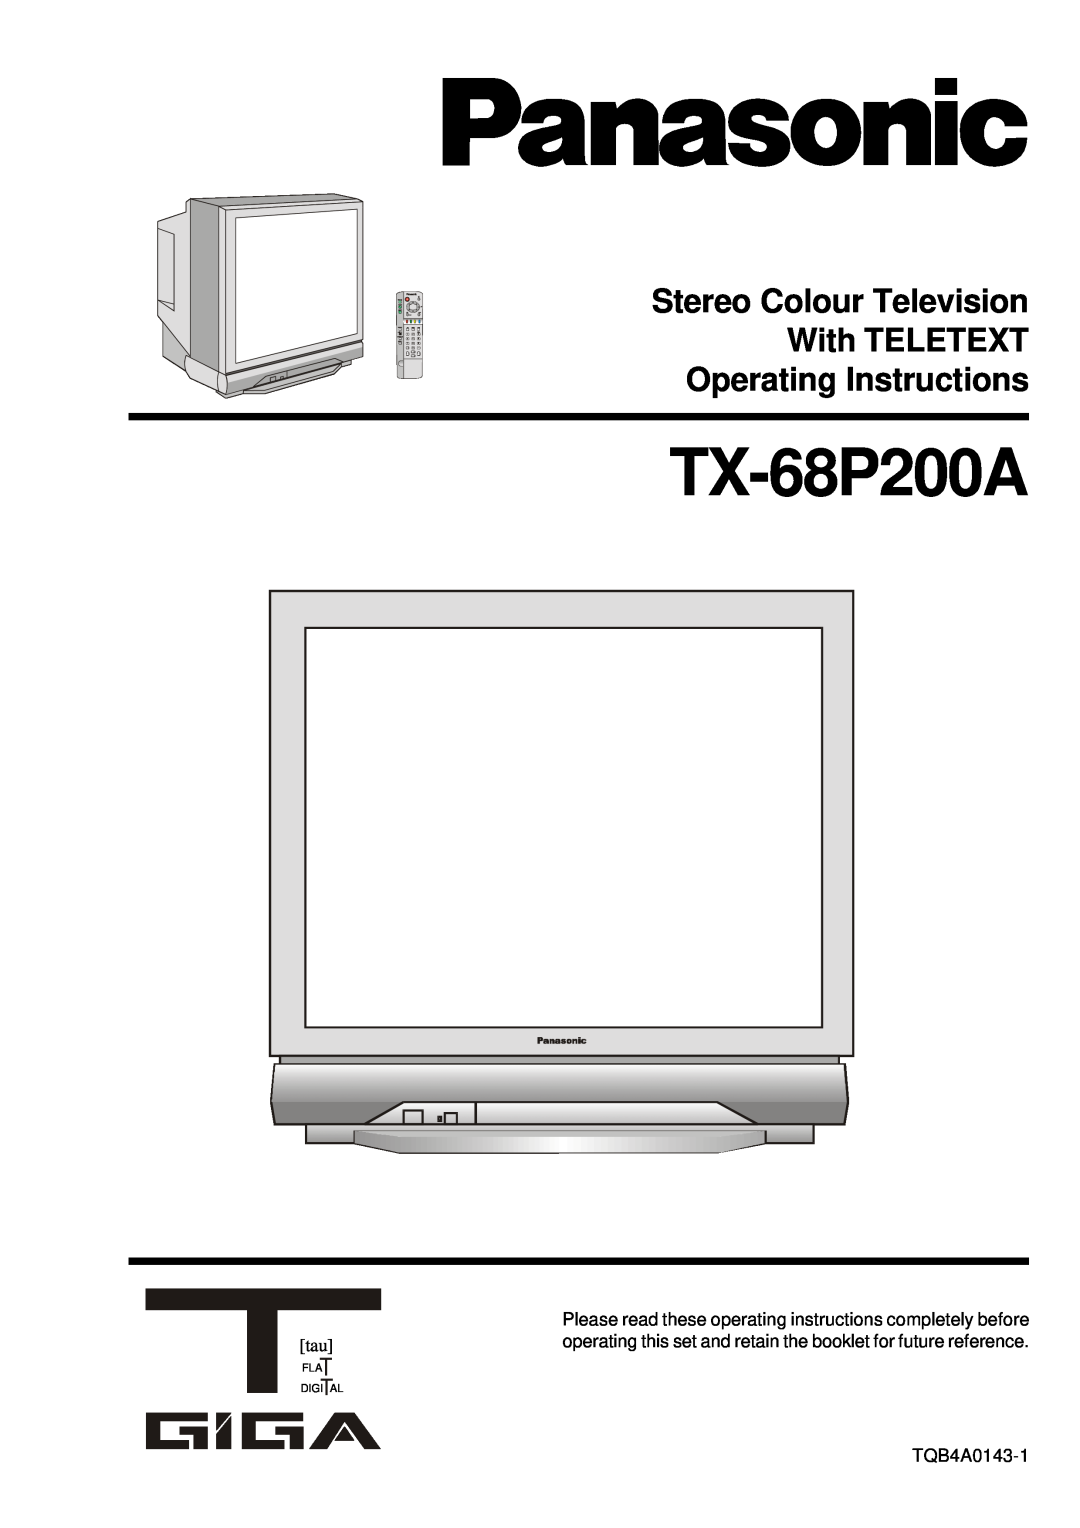 Panasonic TX-68P200A manual Stereo Colour Television With TELETEXT Operating Instructions 